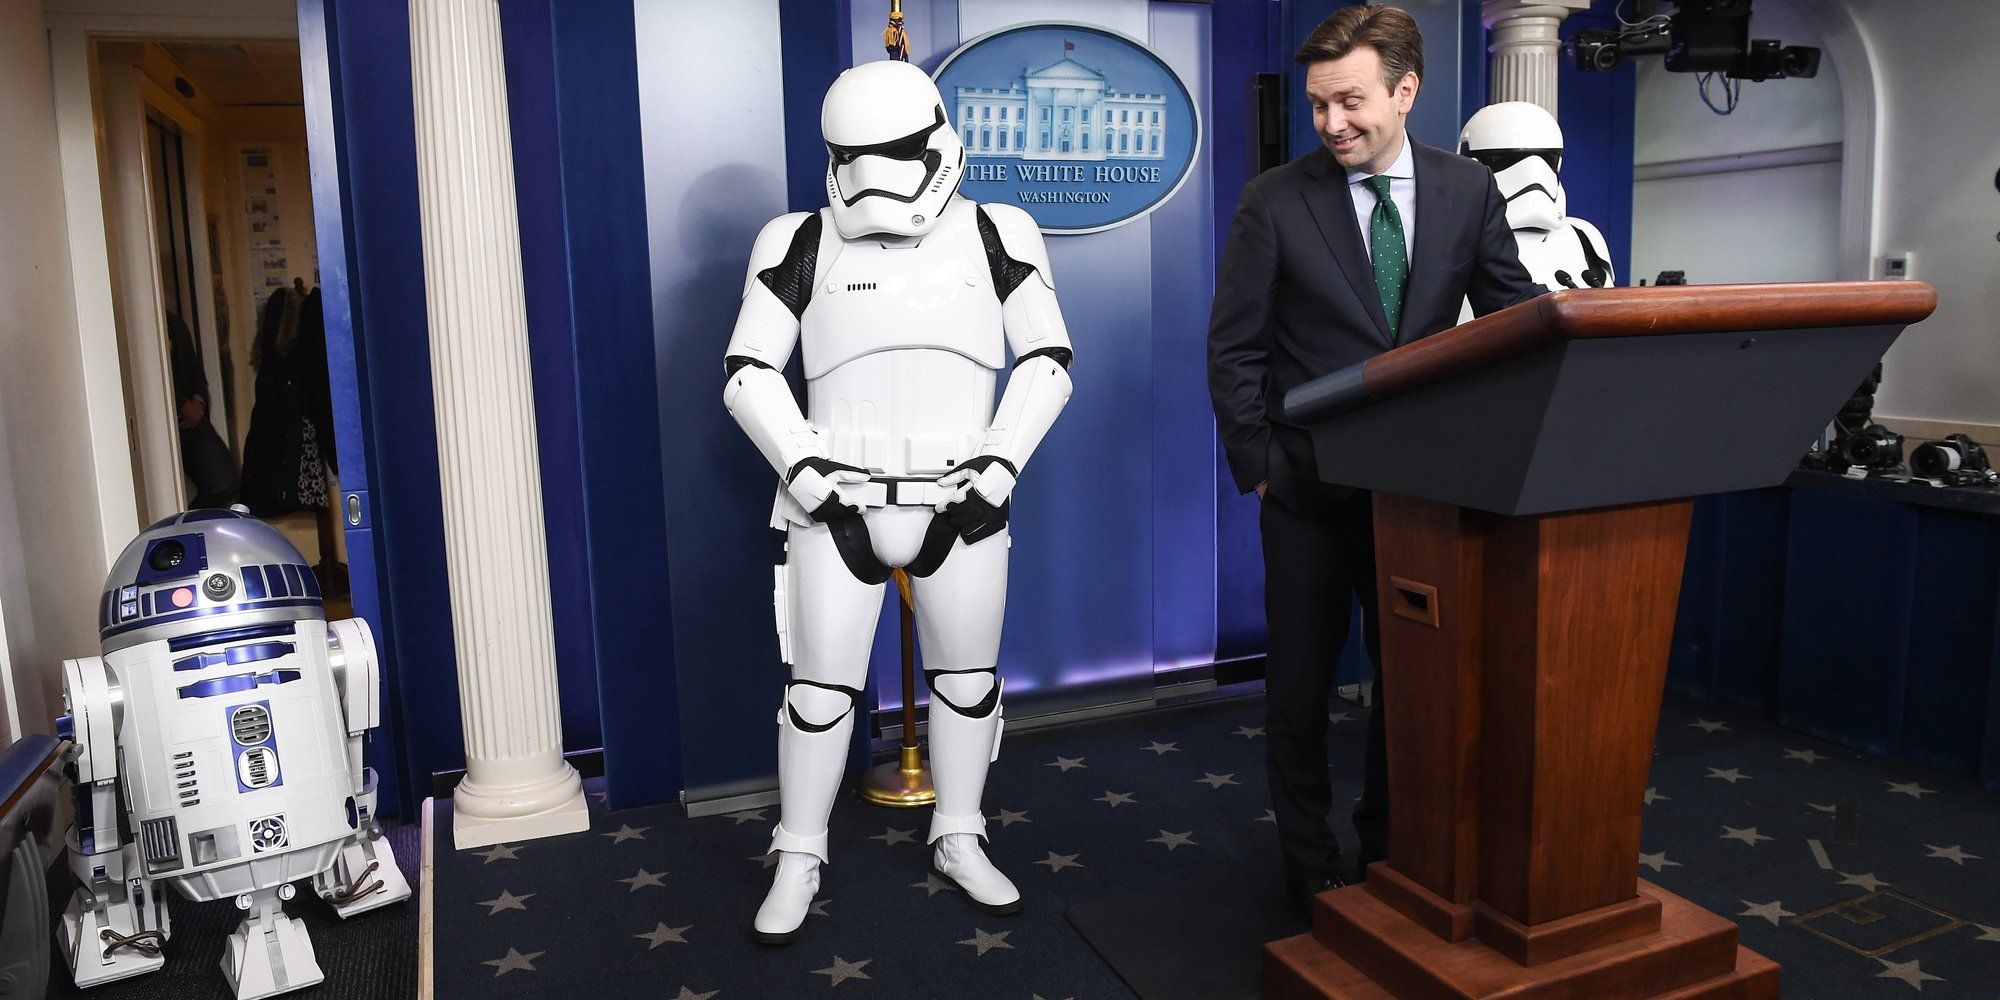 R2-D2 Visits the White House